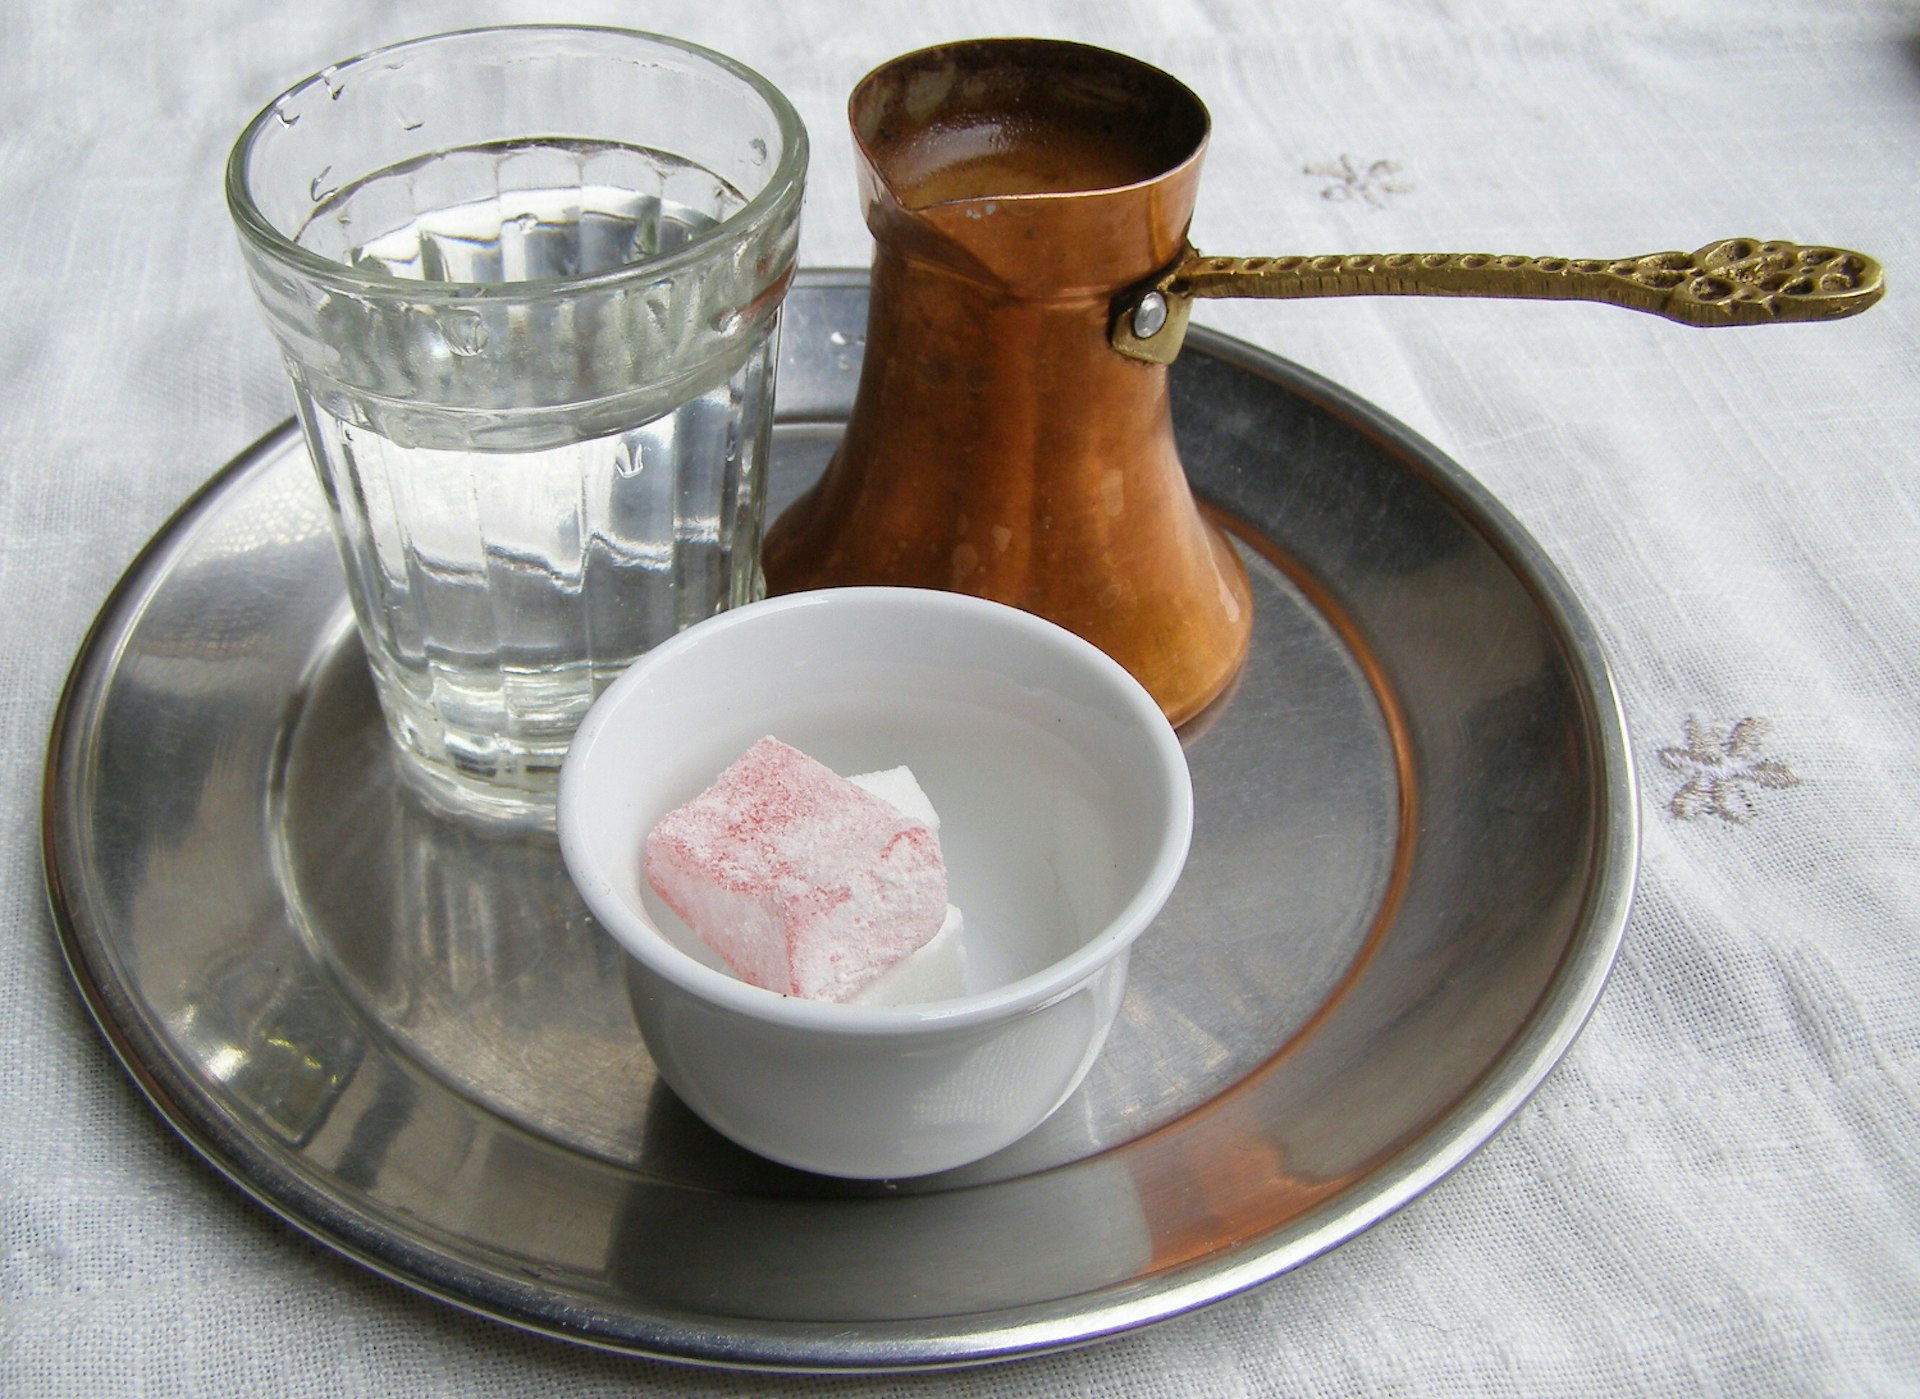 Traditional Bosnian coffee, accompanied by Turkish delight and water. Image by Beatdrifter / Andy Holmes / Getty